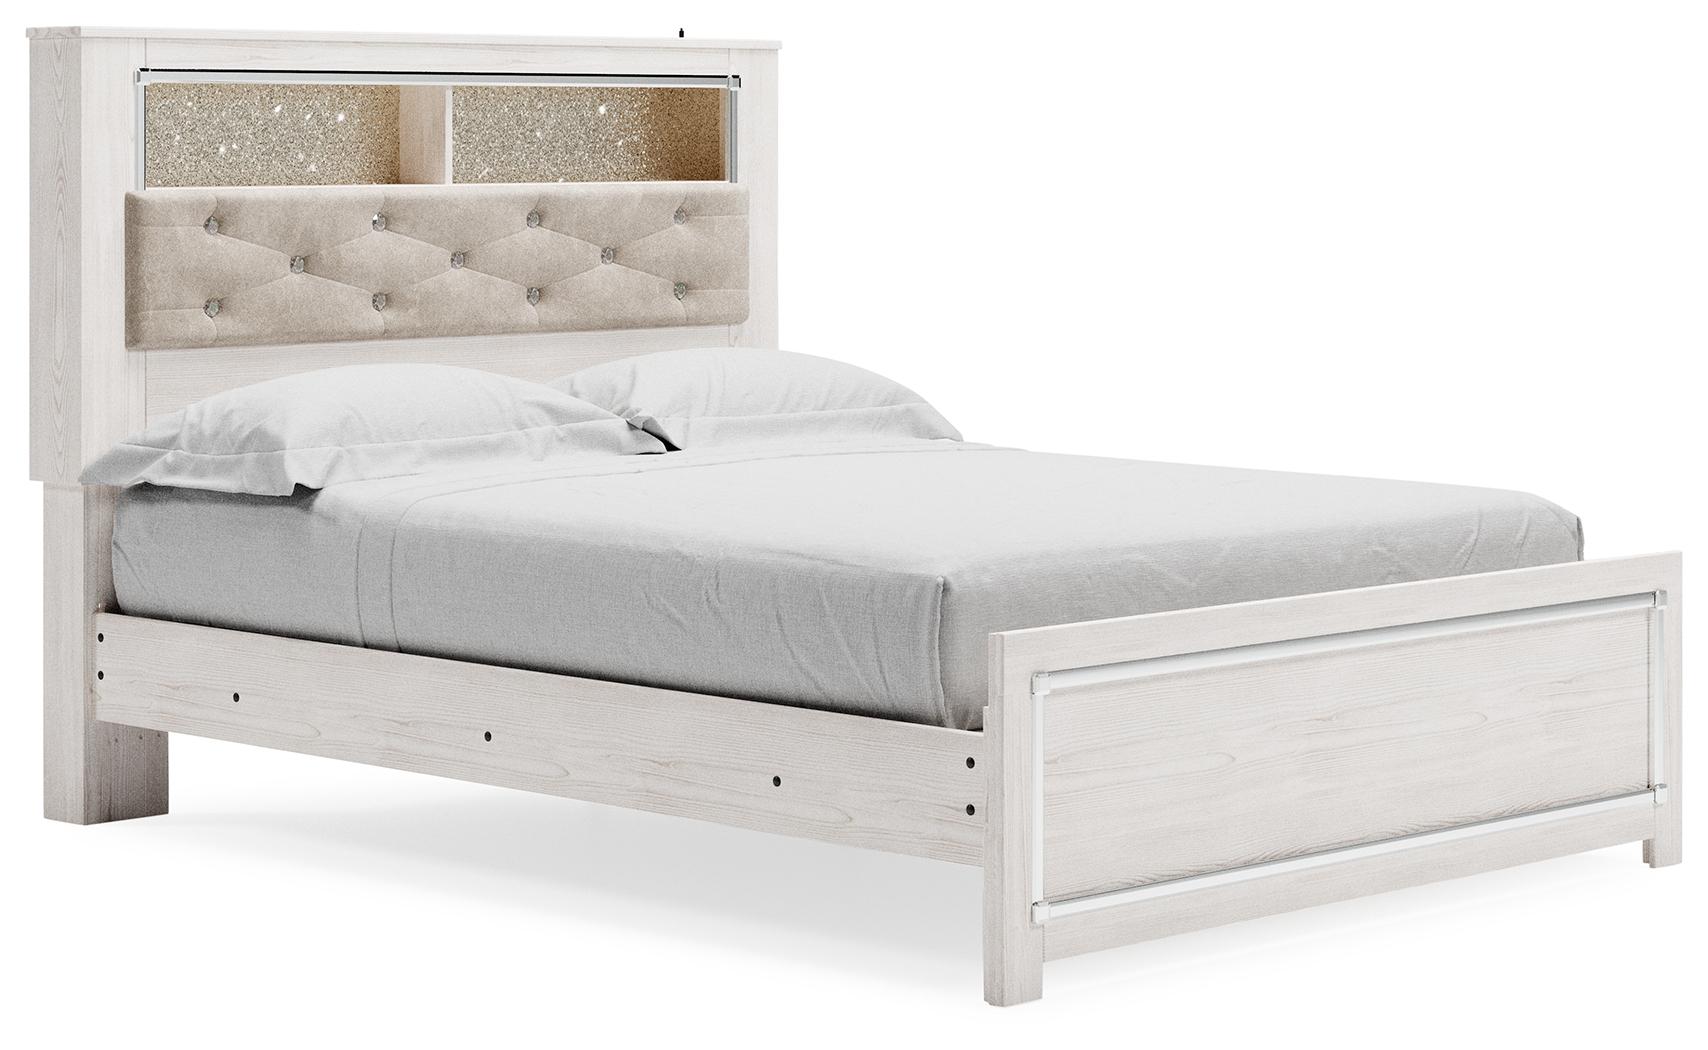 ASHLEY FURNITURE B2640B4 Altyra Queen Panel Bookcase Bed